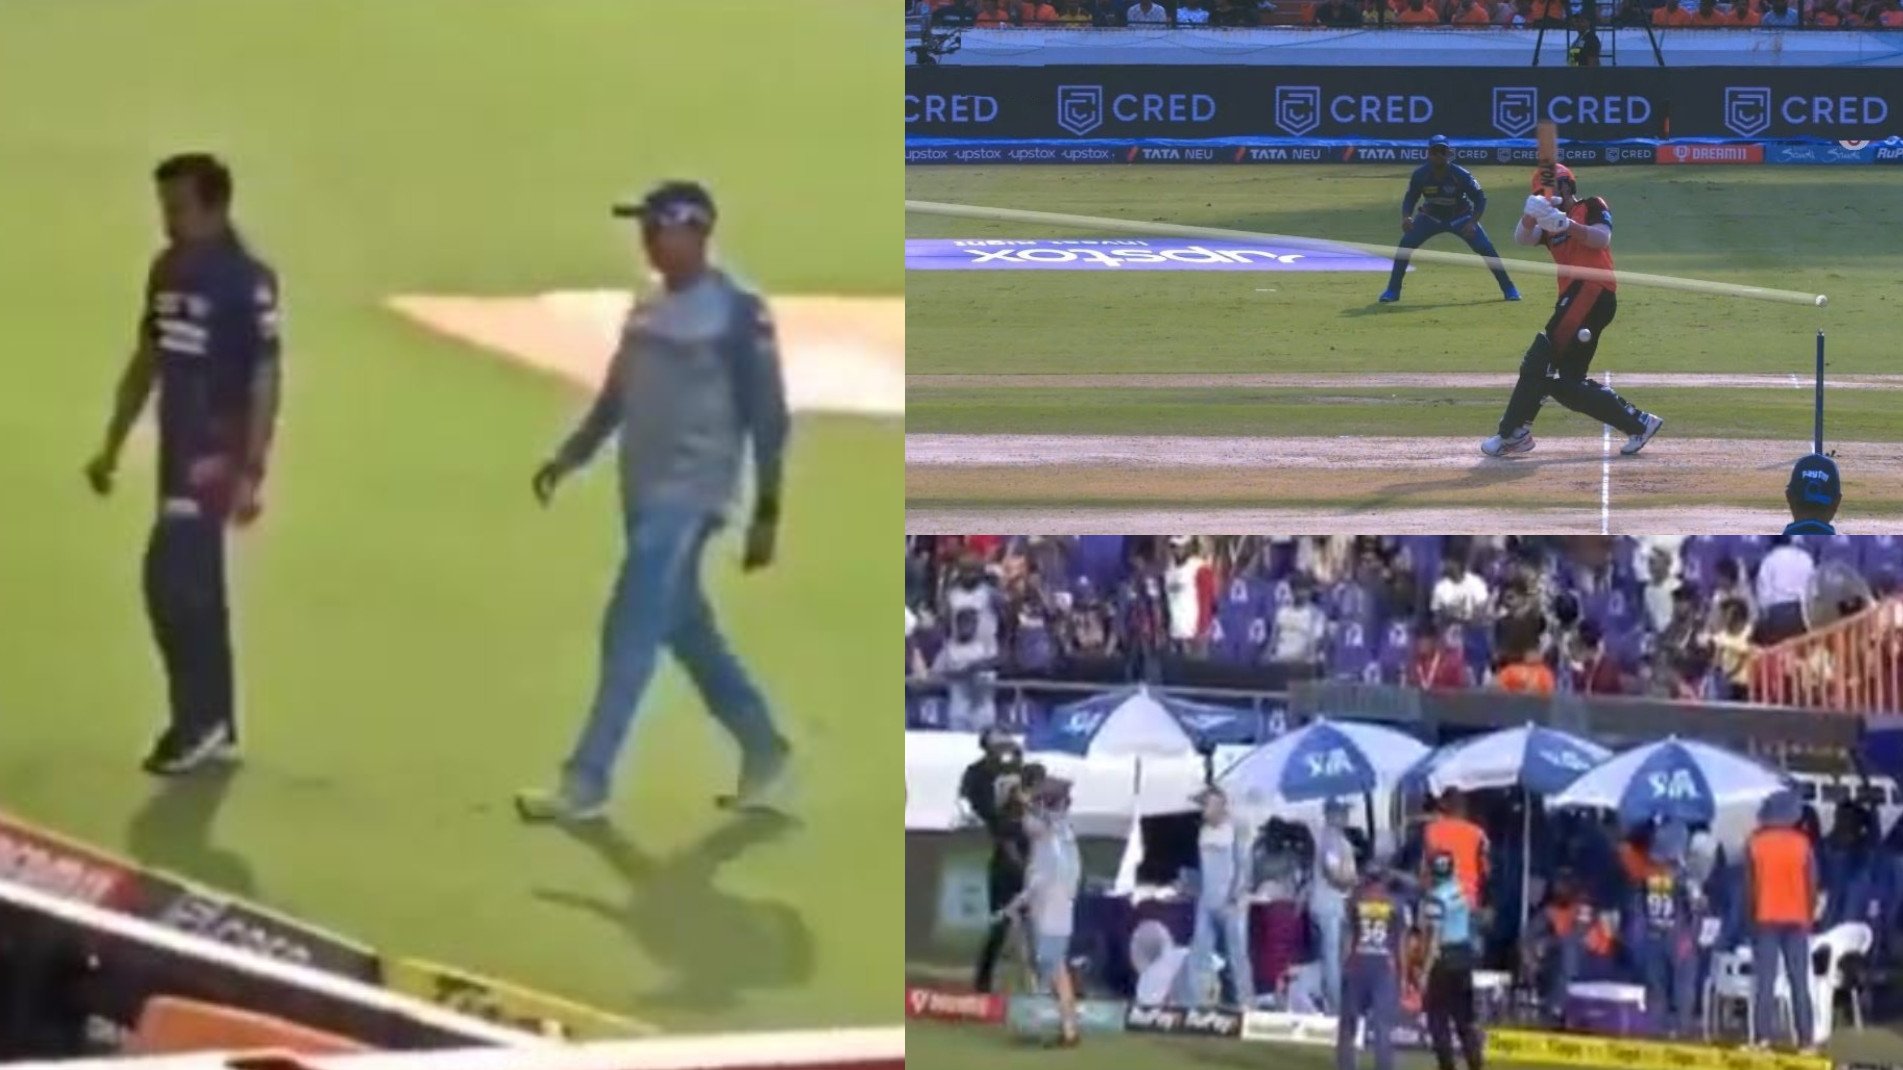 IPL 2023: WATCH- “Kohli Kohli” chants echo behind LSG dugout in the aftermath of no-ball fiasco during SRH innings